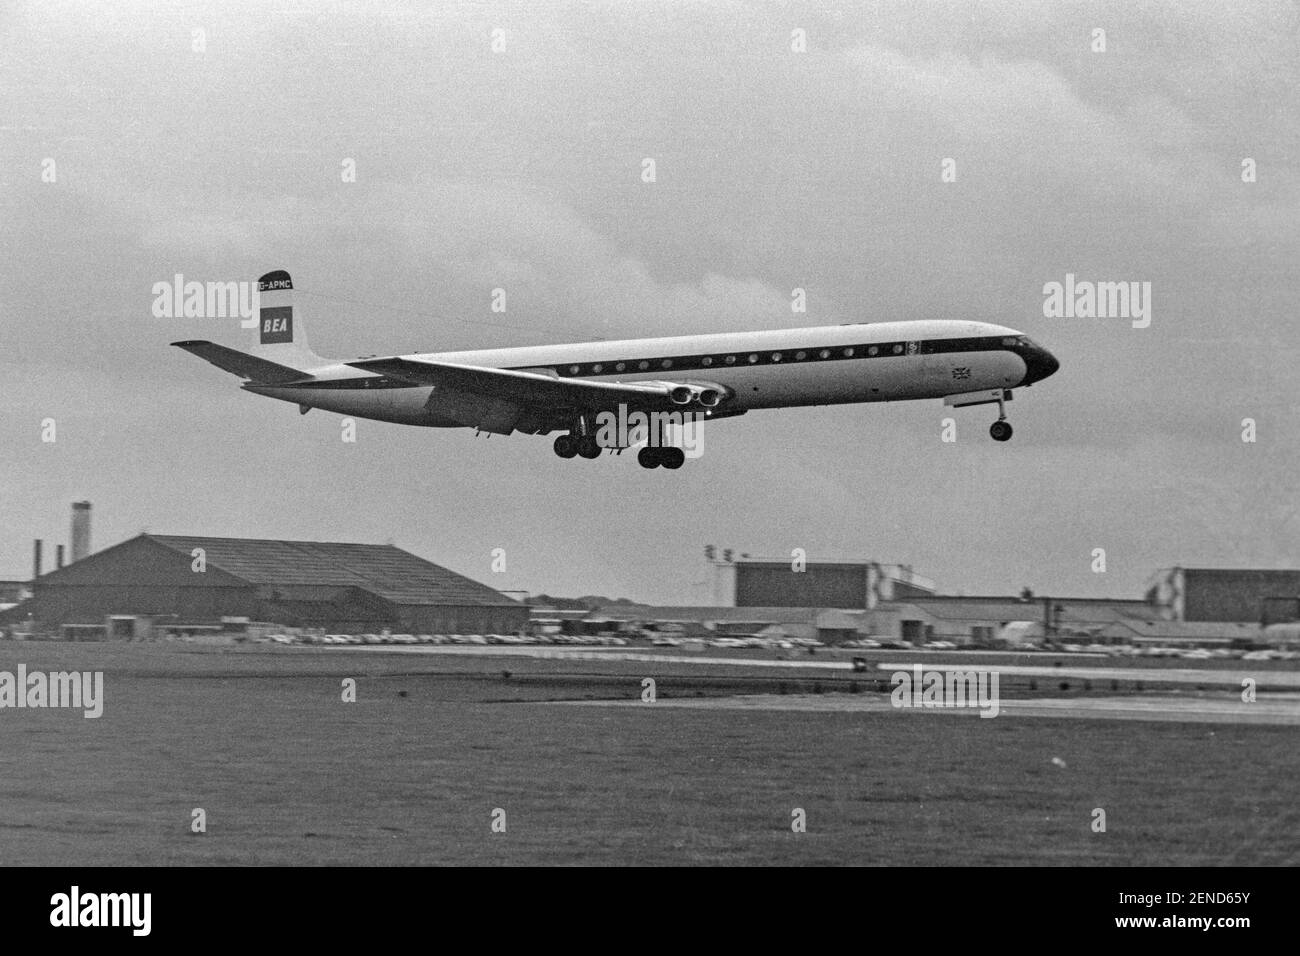 1960s jet plane Black and White Stock Photos & Images - Alamy